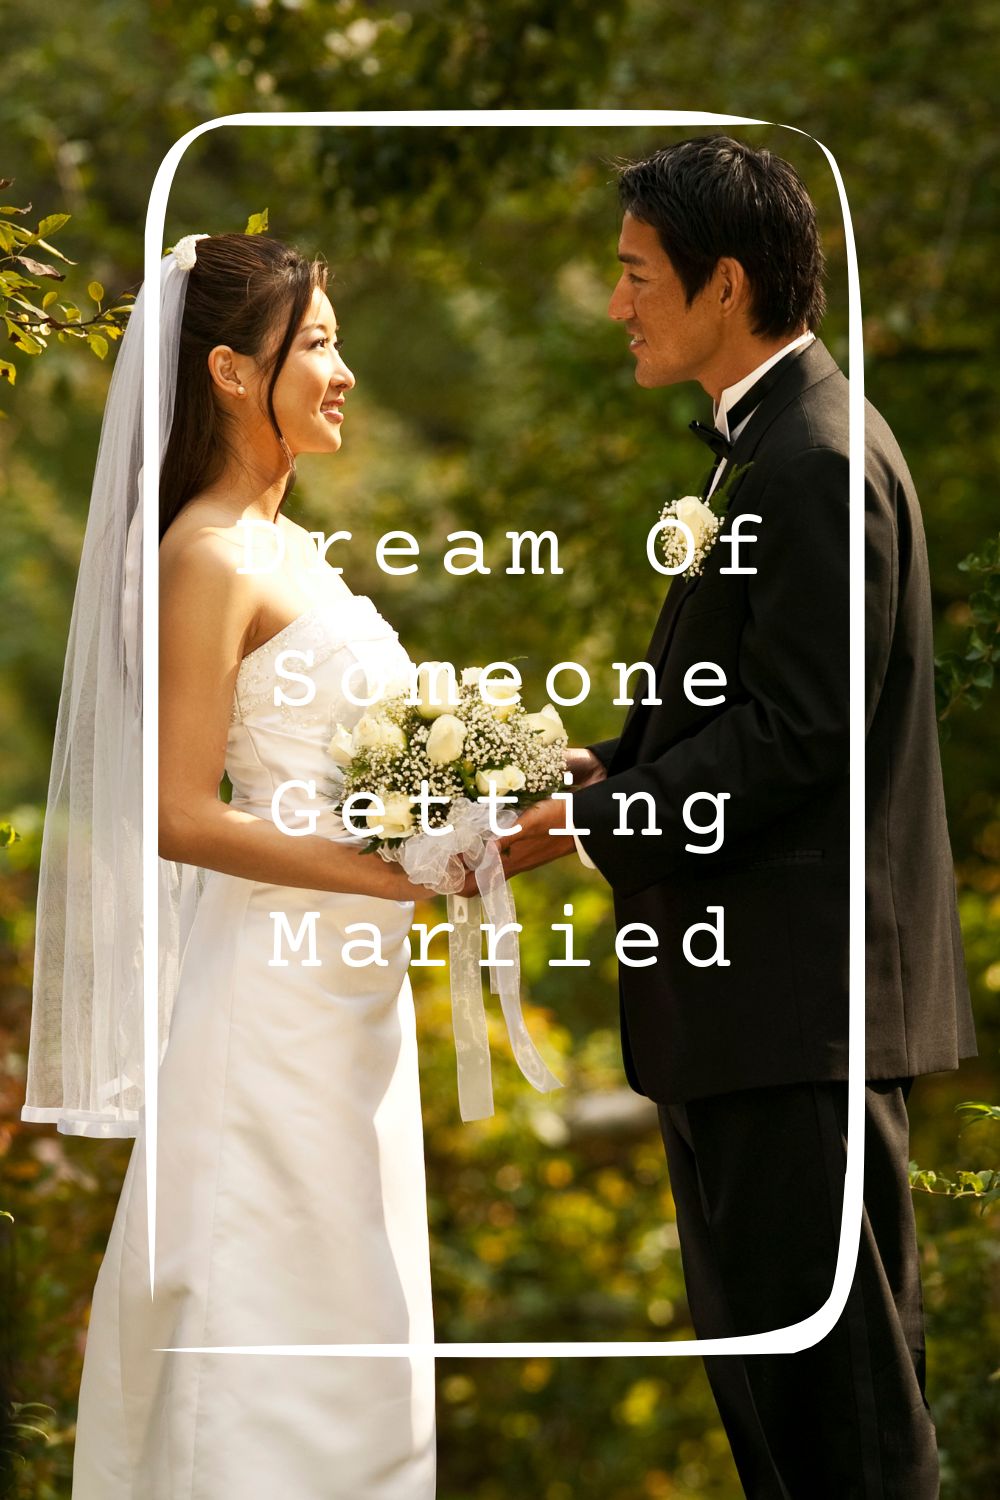 Dream Of Someone Getting Married Meanings 1